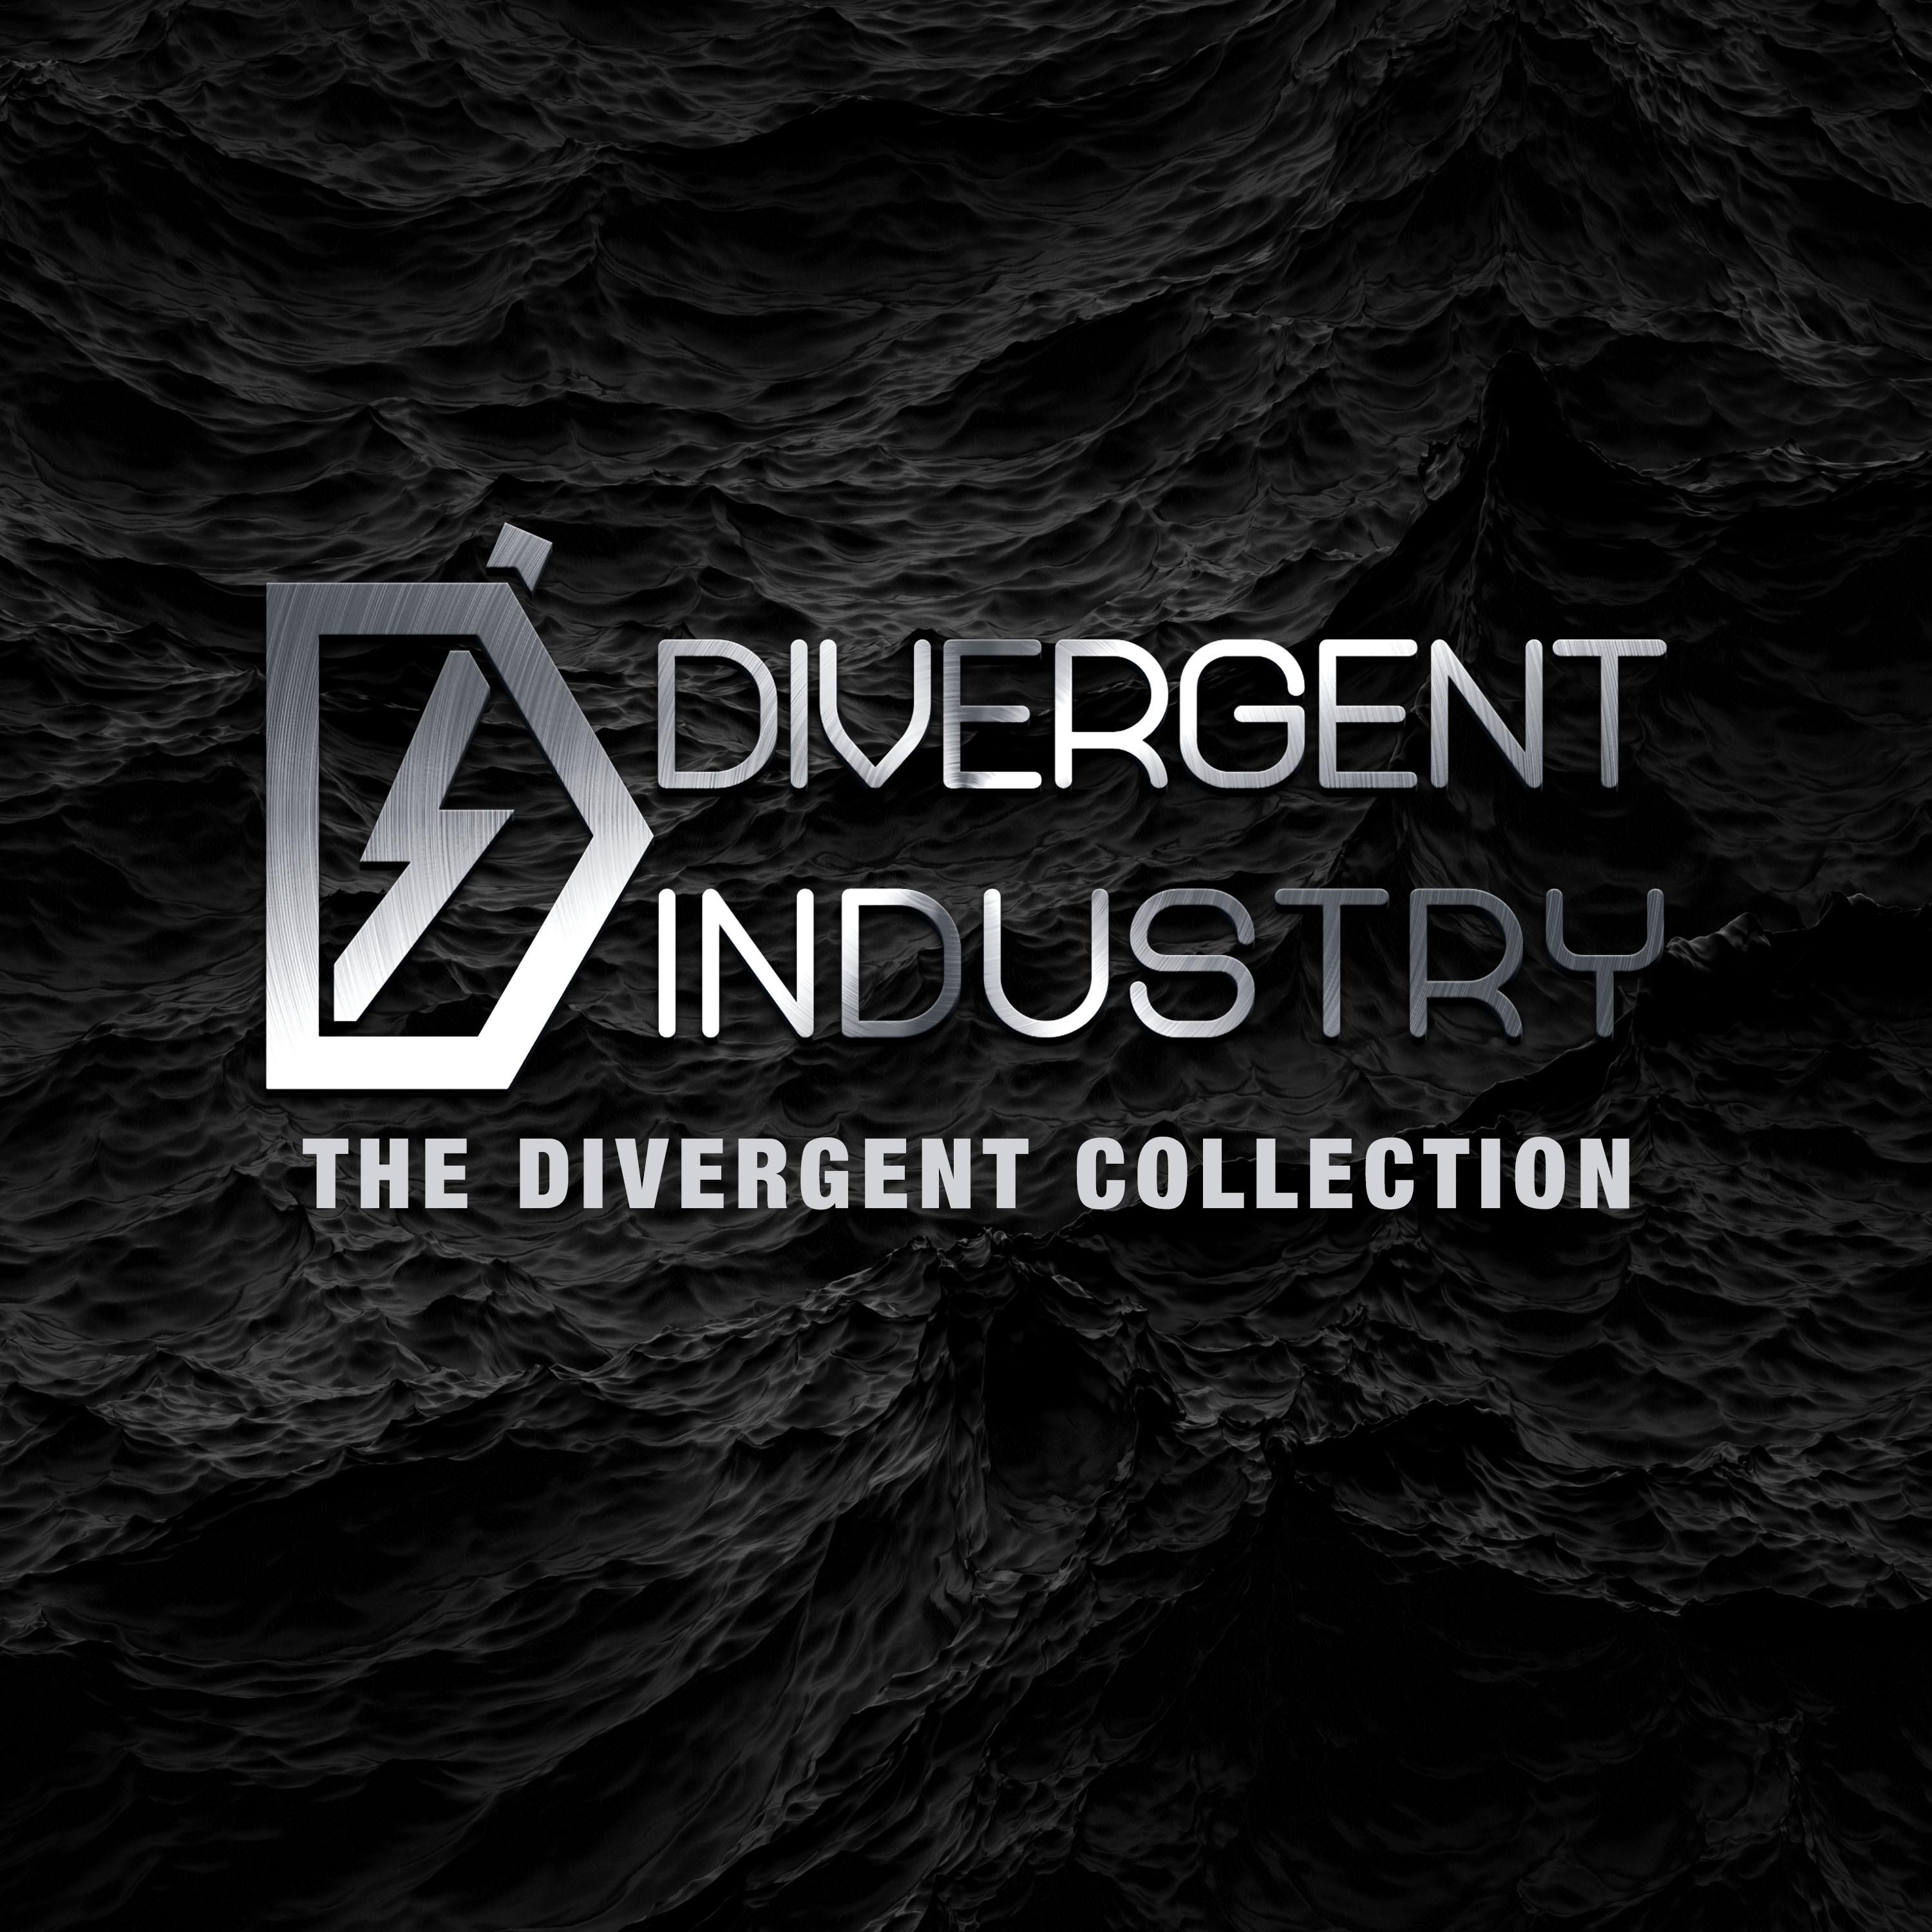 The Divergent Collection